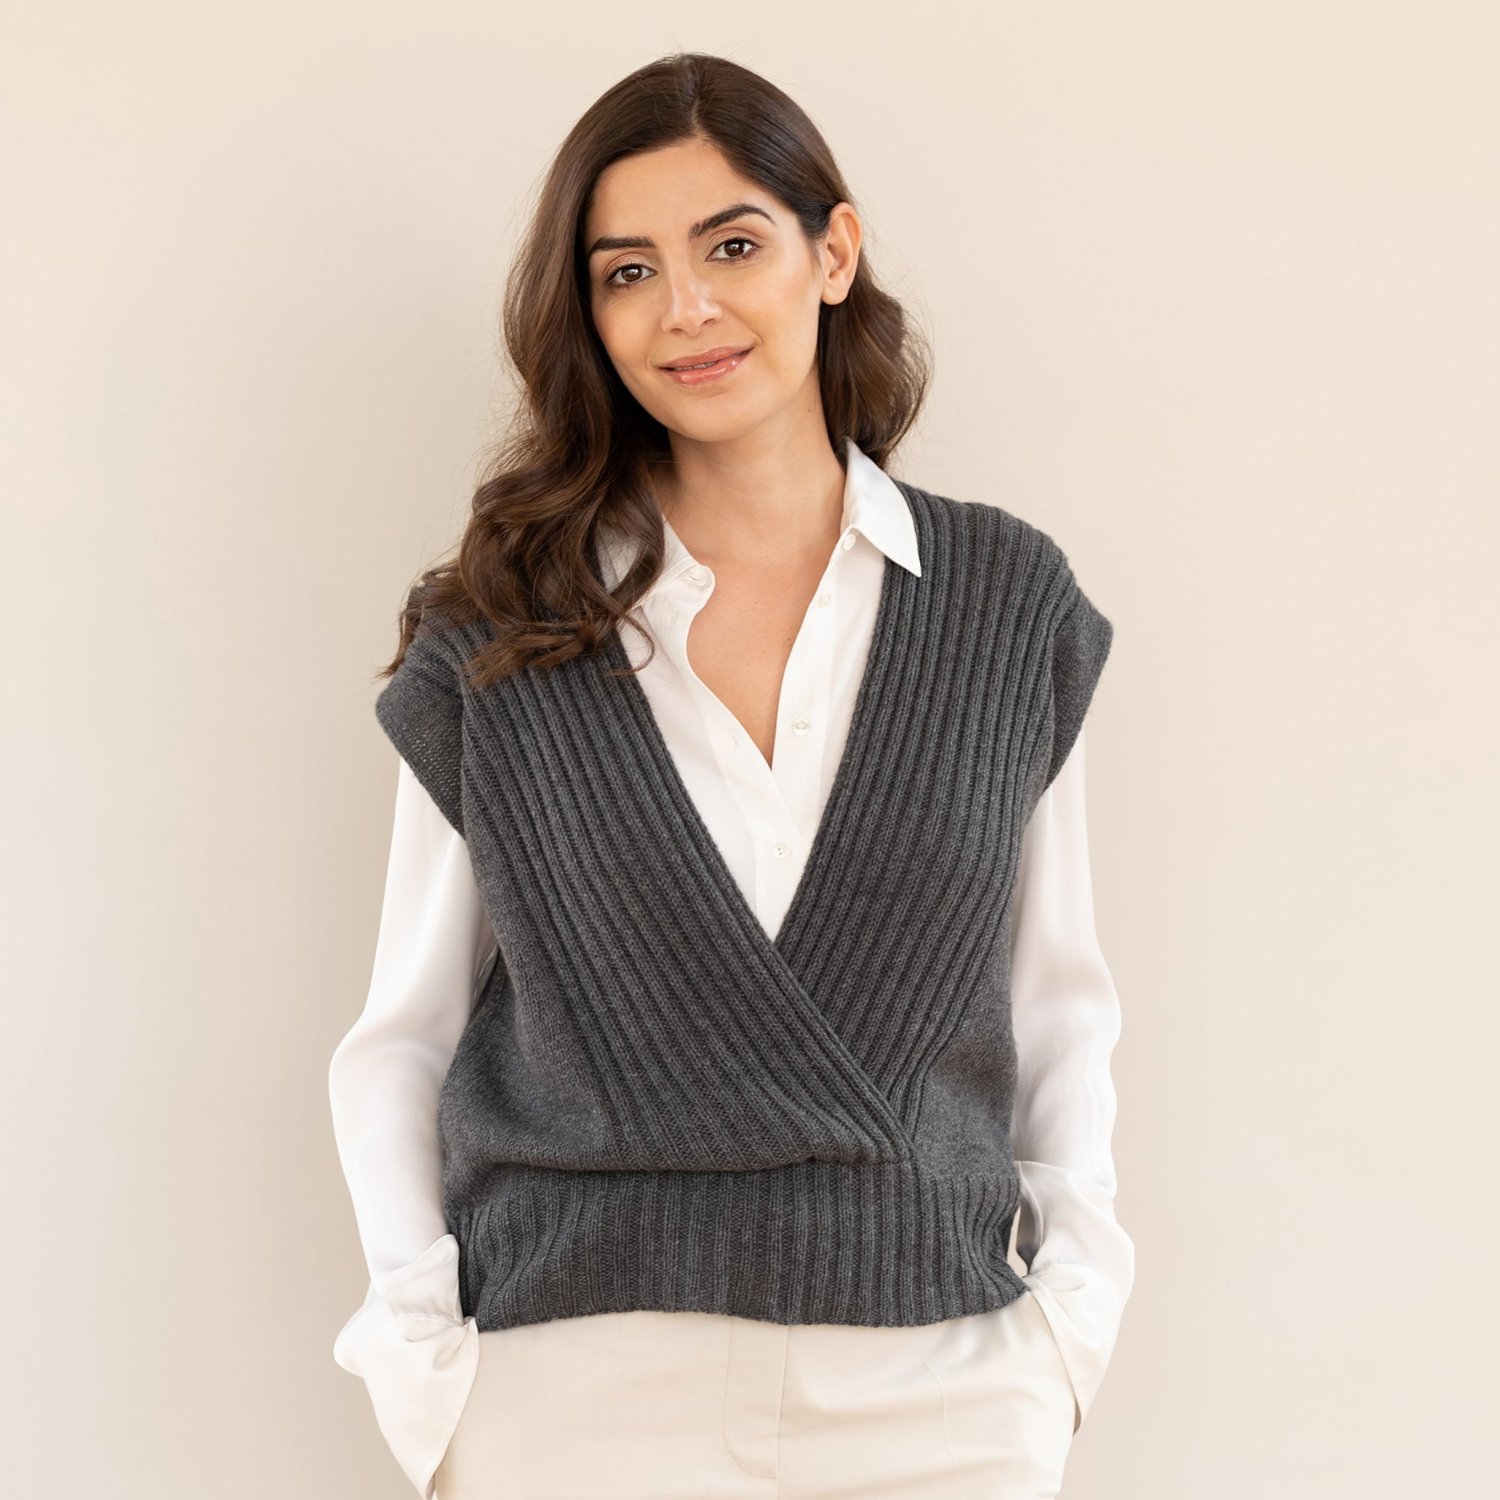 Canale knitting pattern by Julie Hoover — Julie Hoover